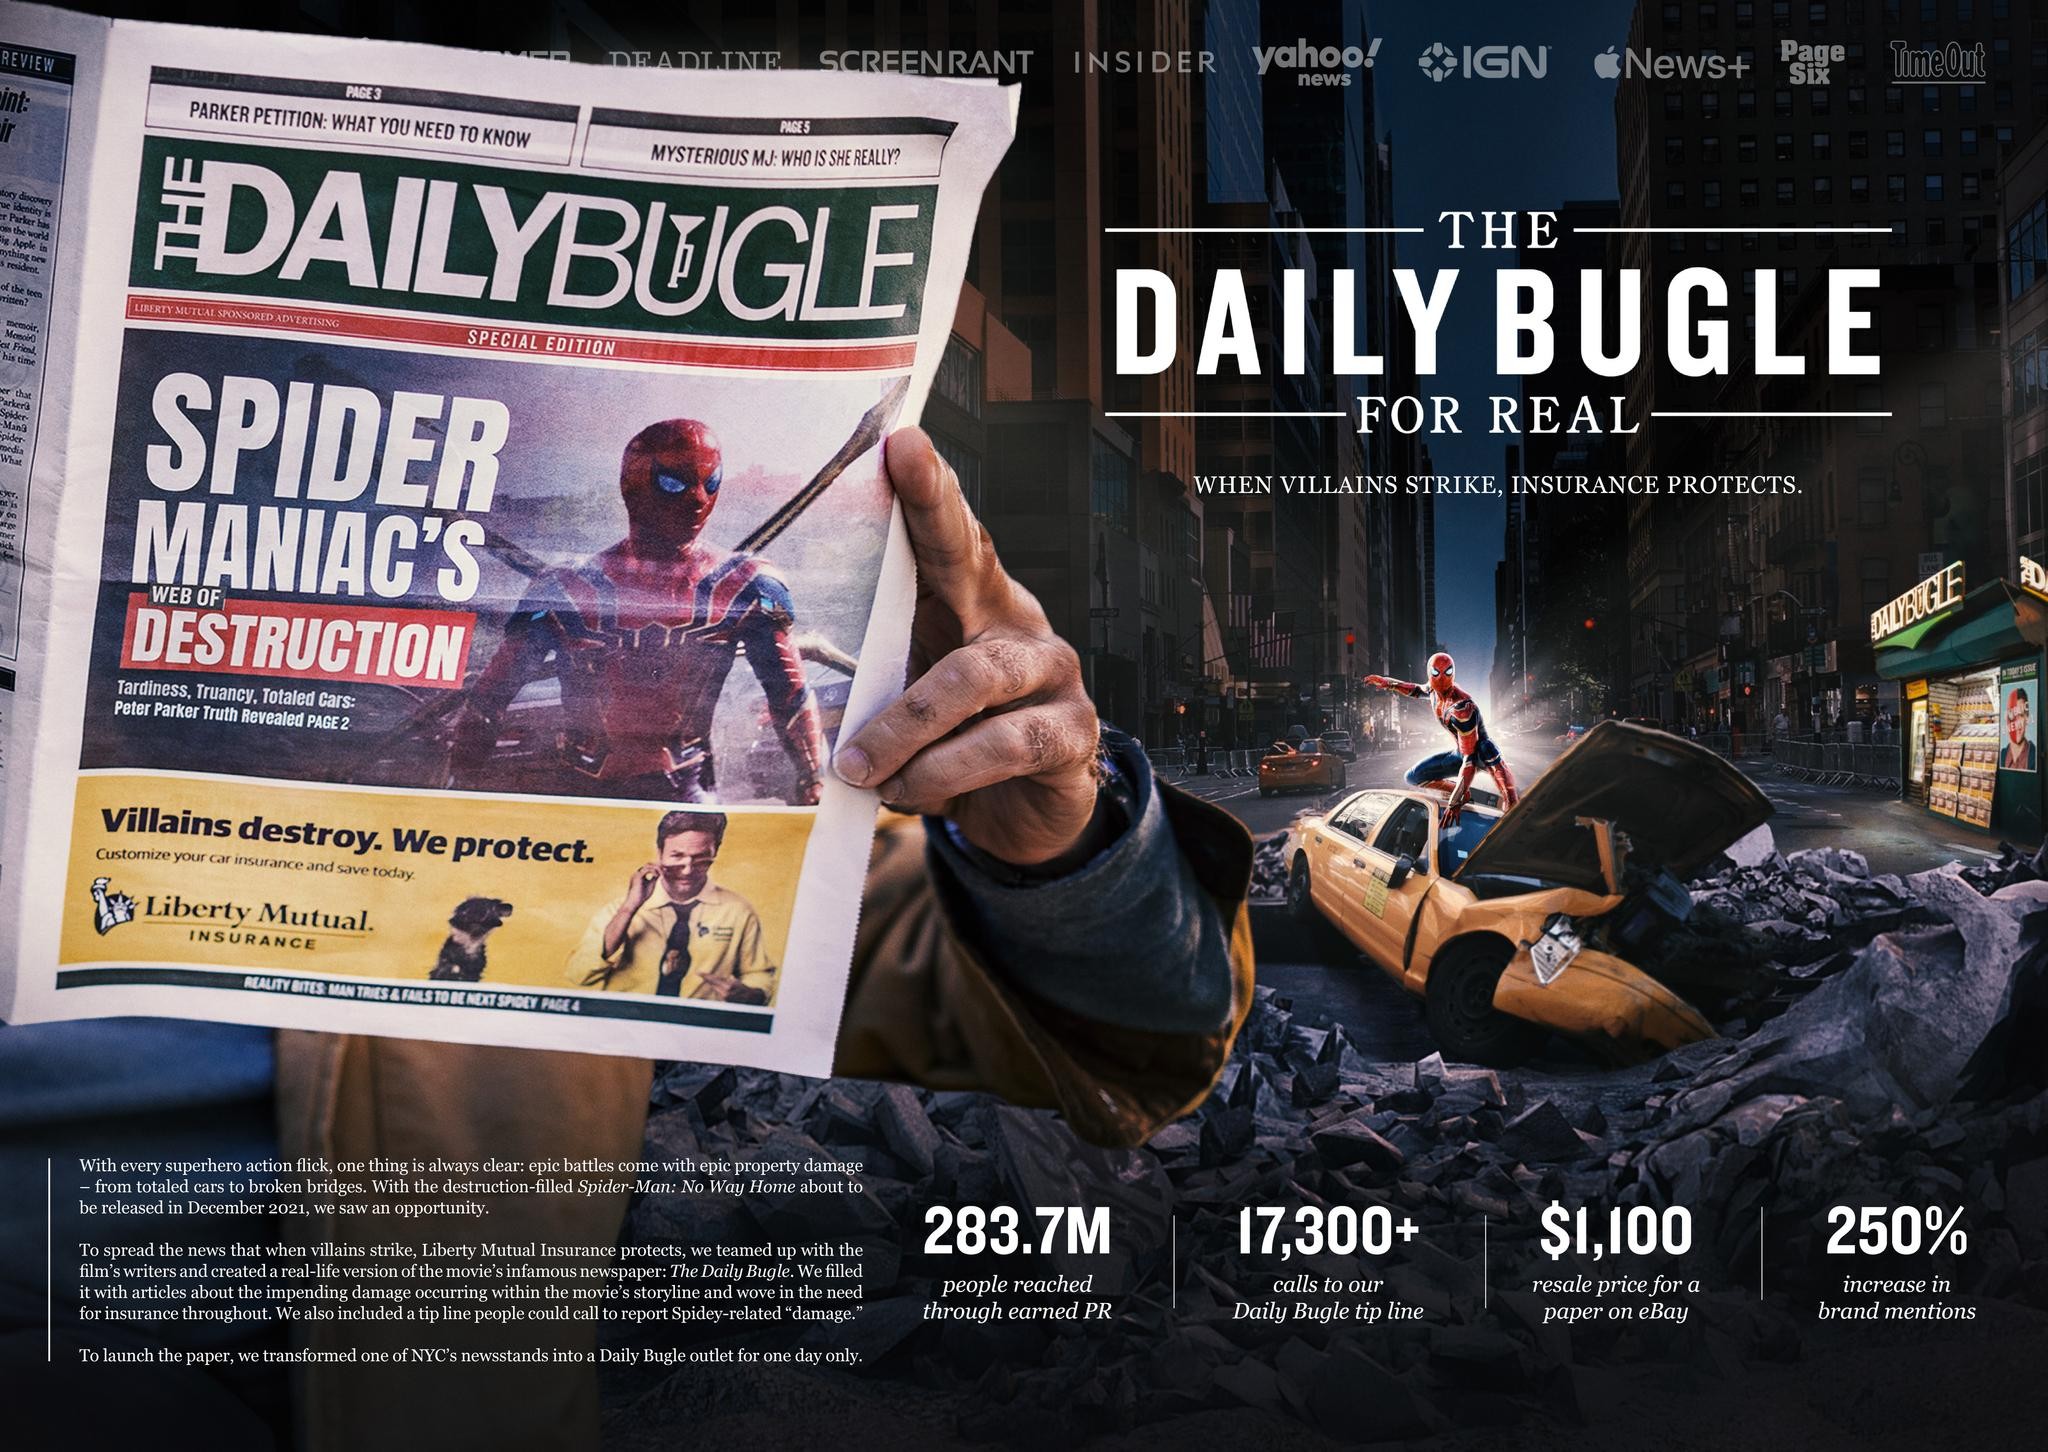 The Daily Bugle. For Real.